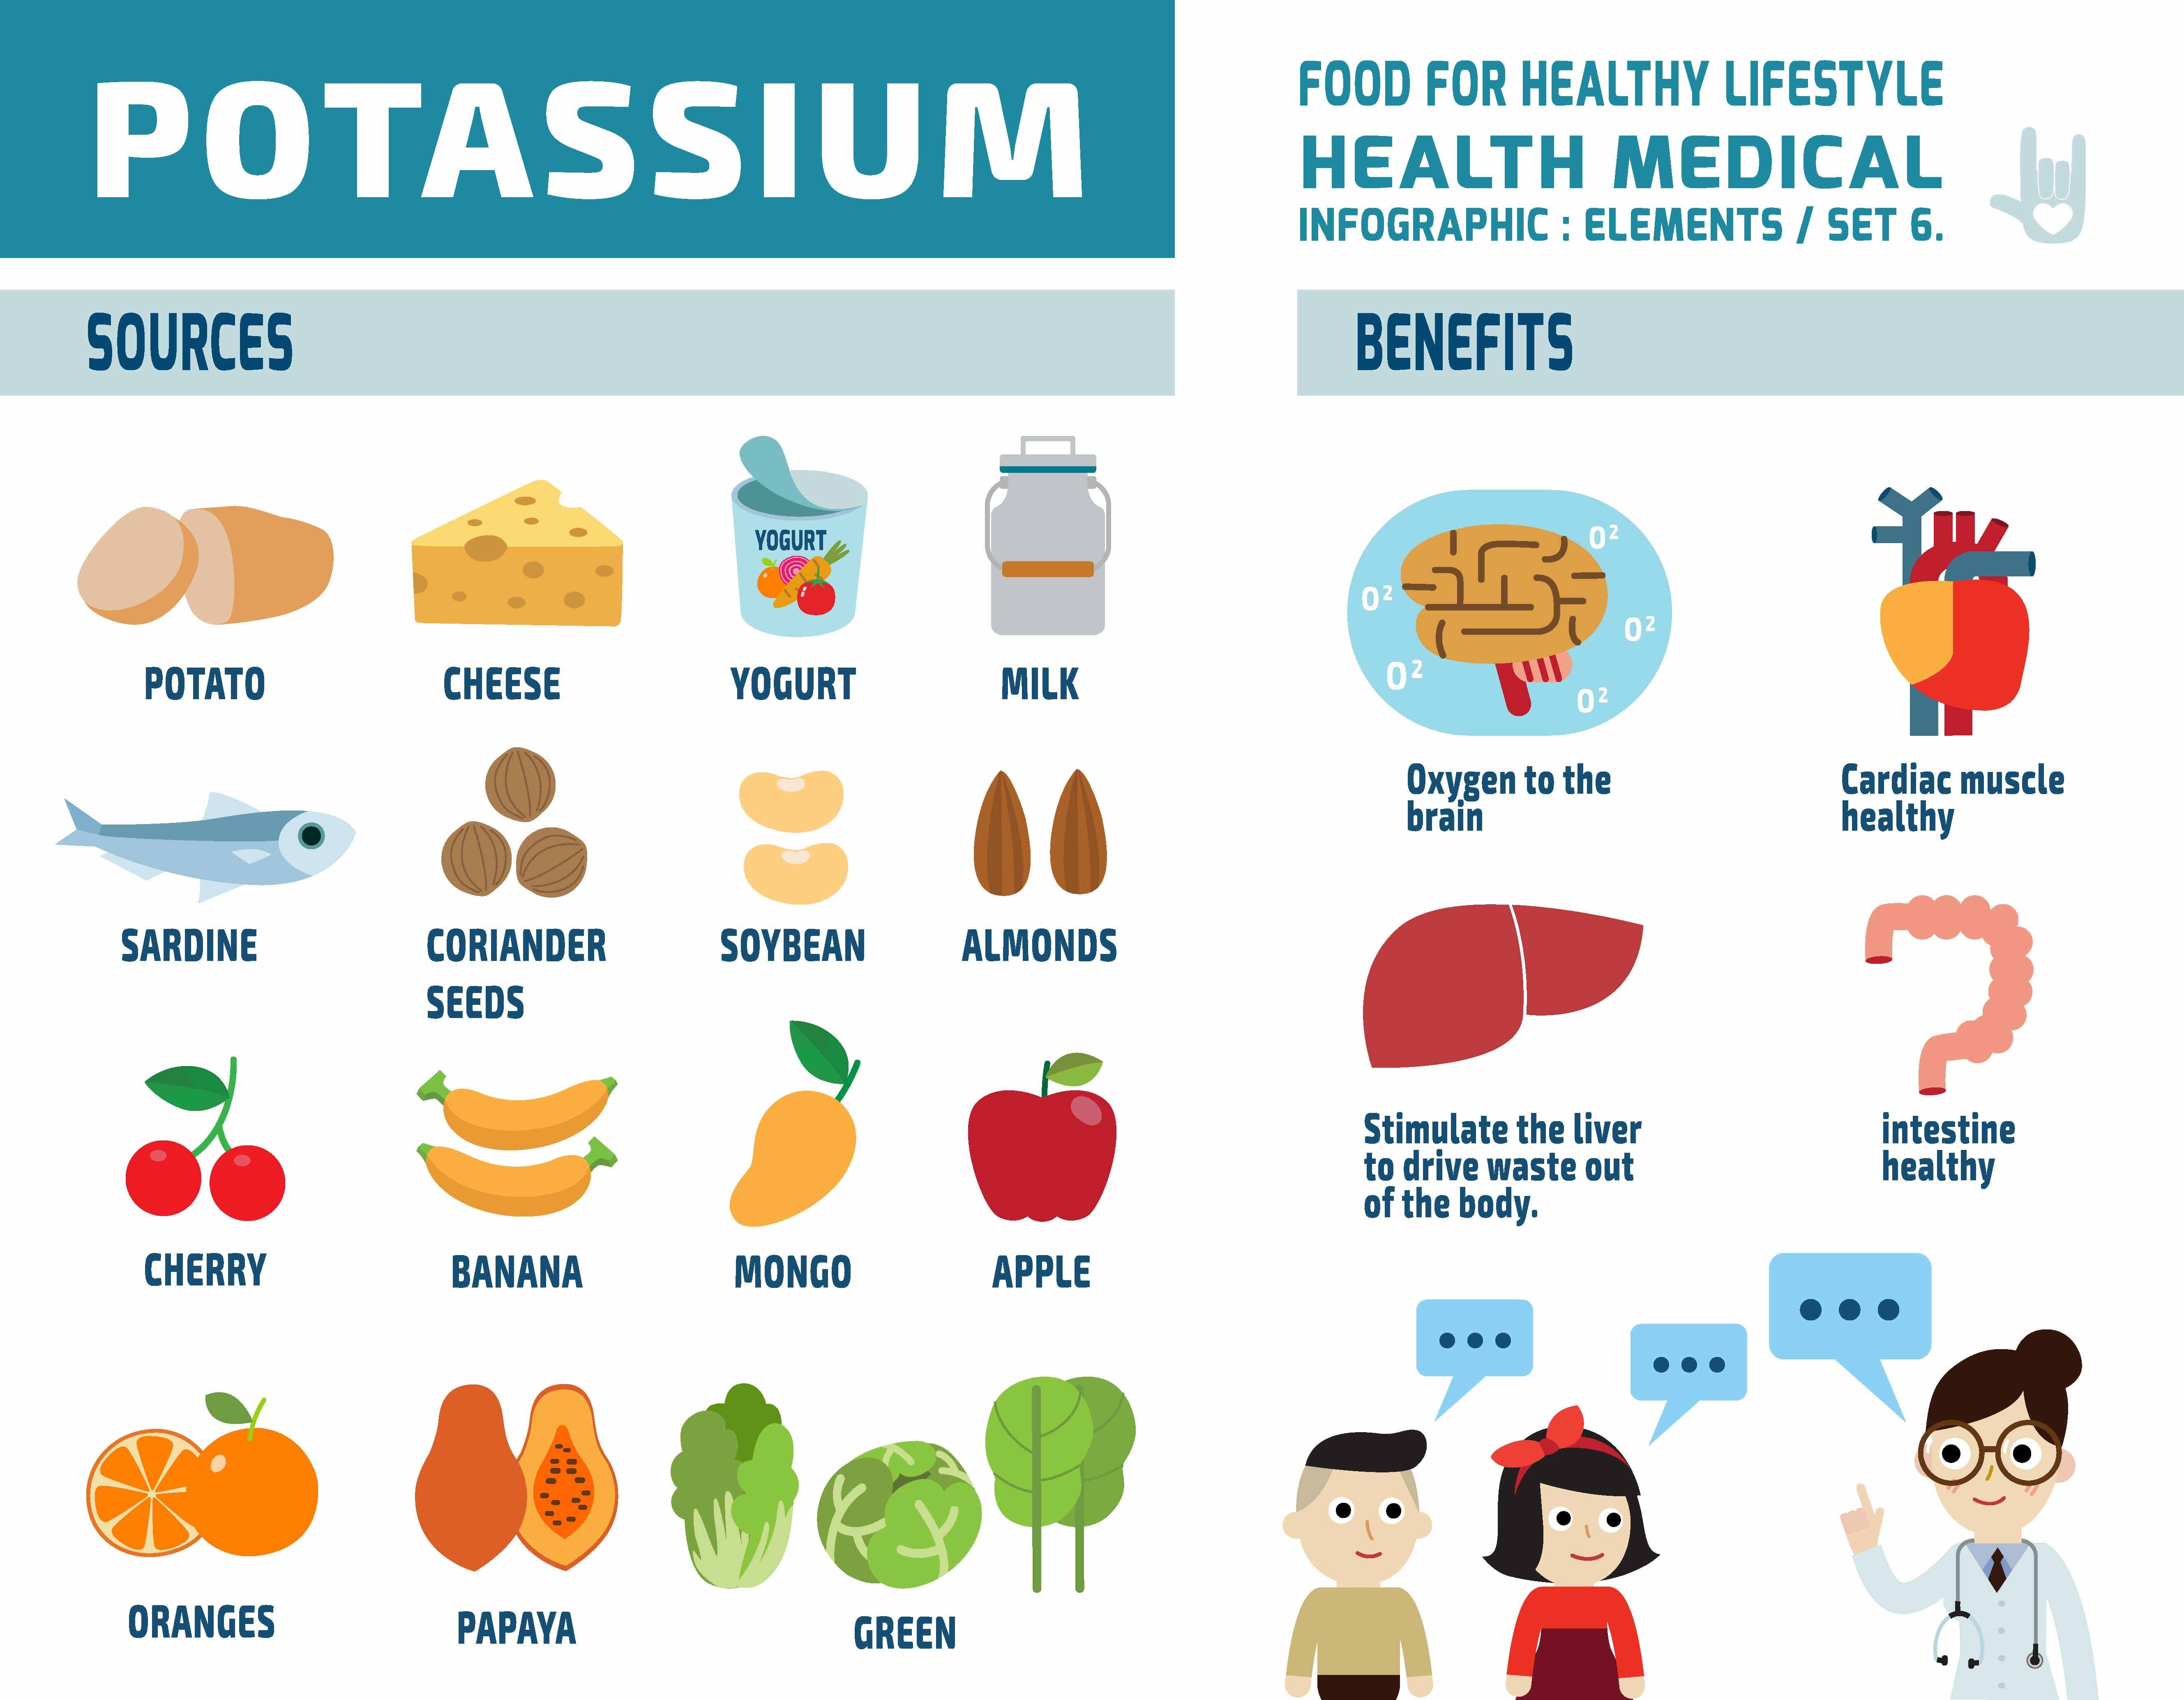 Potassium's most important sources and benefits - infographic